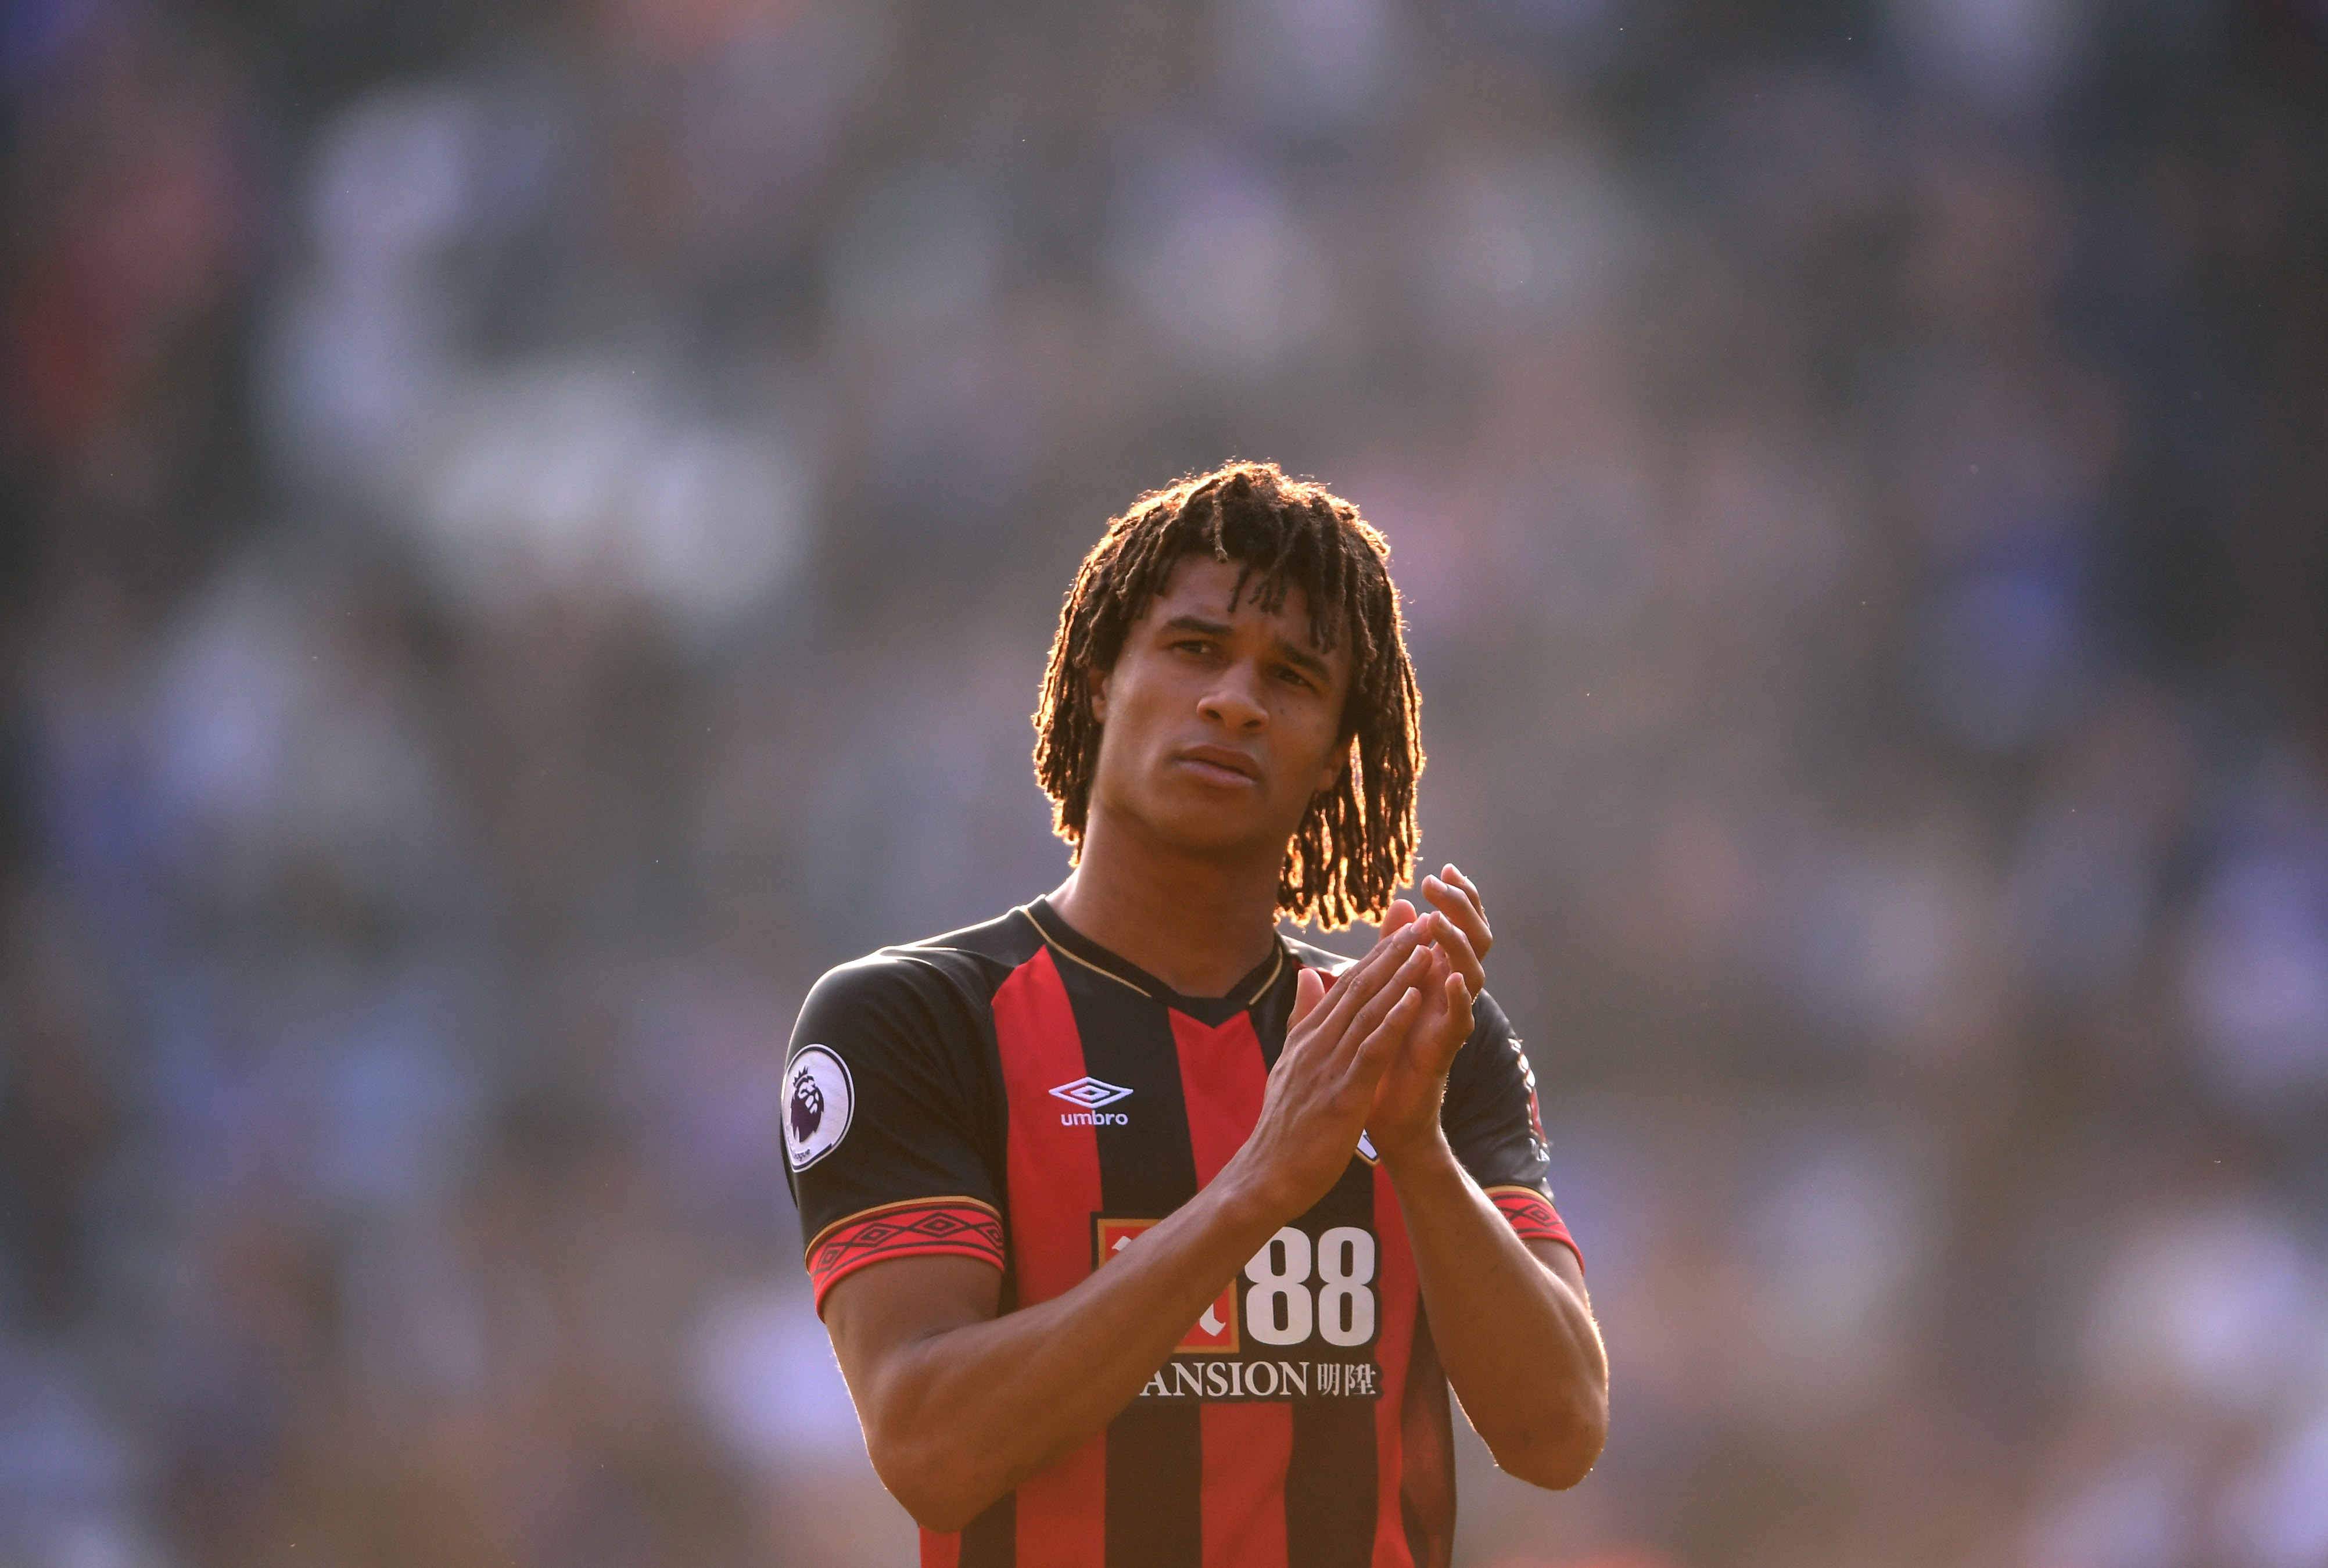 Nathan Ake is set for a move to one of the bigwigs, with Tottenham, Manchester United and Chelsea interested. (Picture Courtesy - AFP/Getty Images)